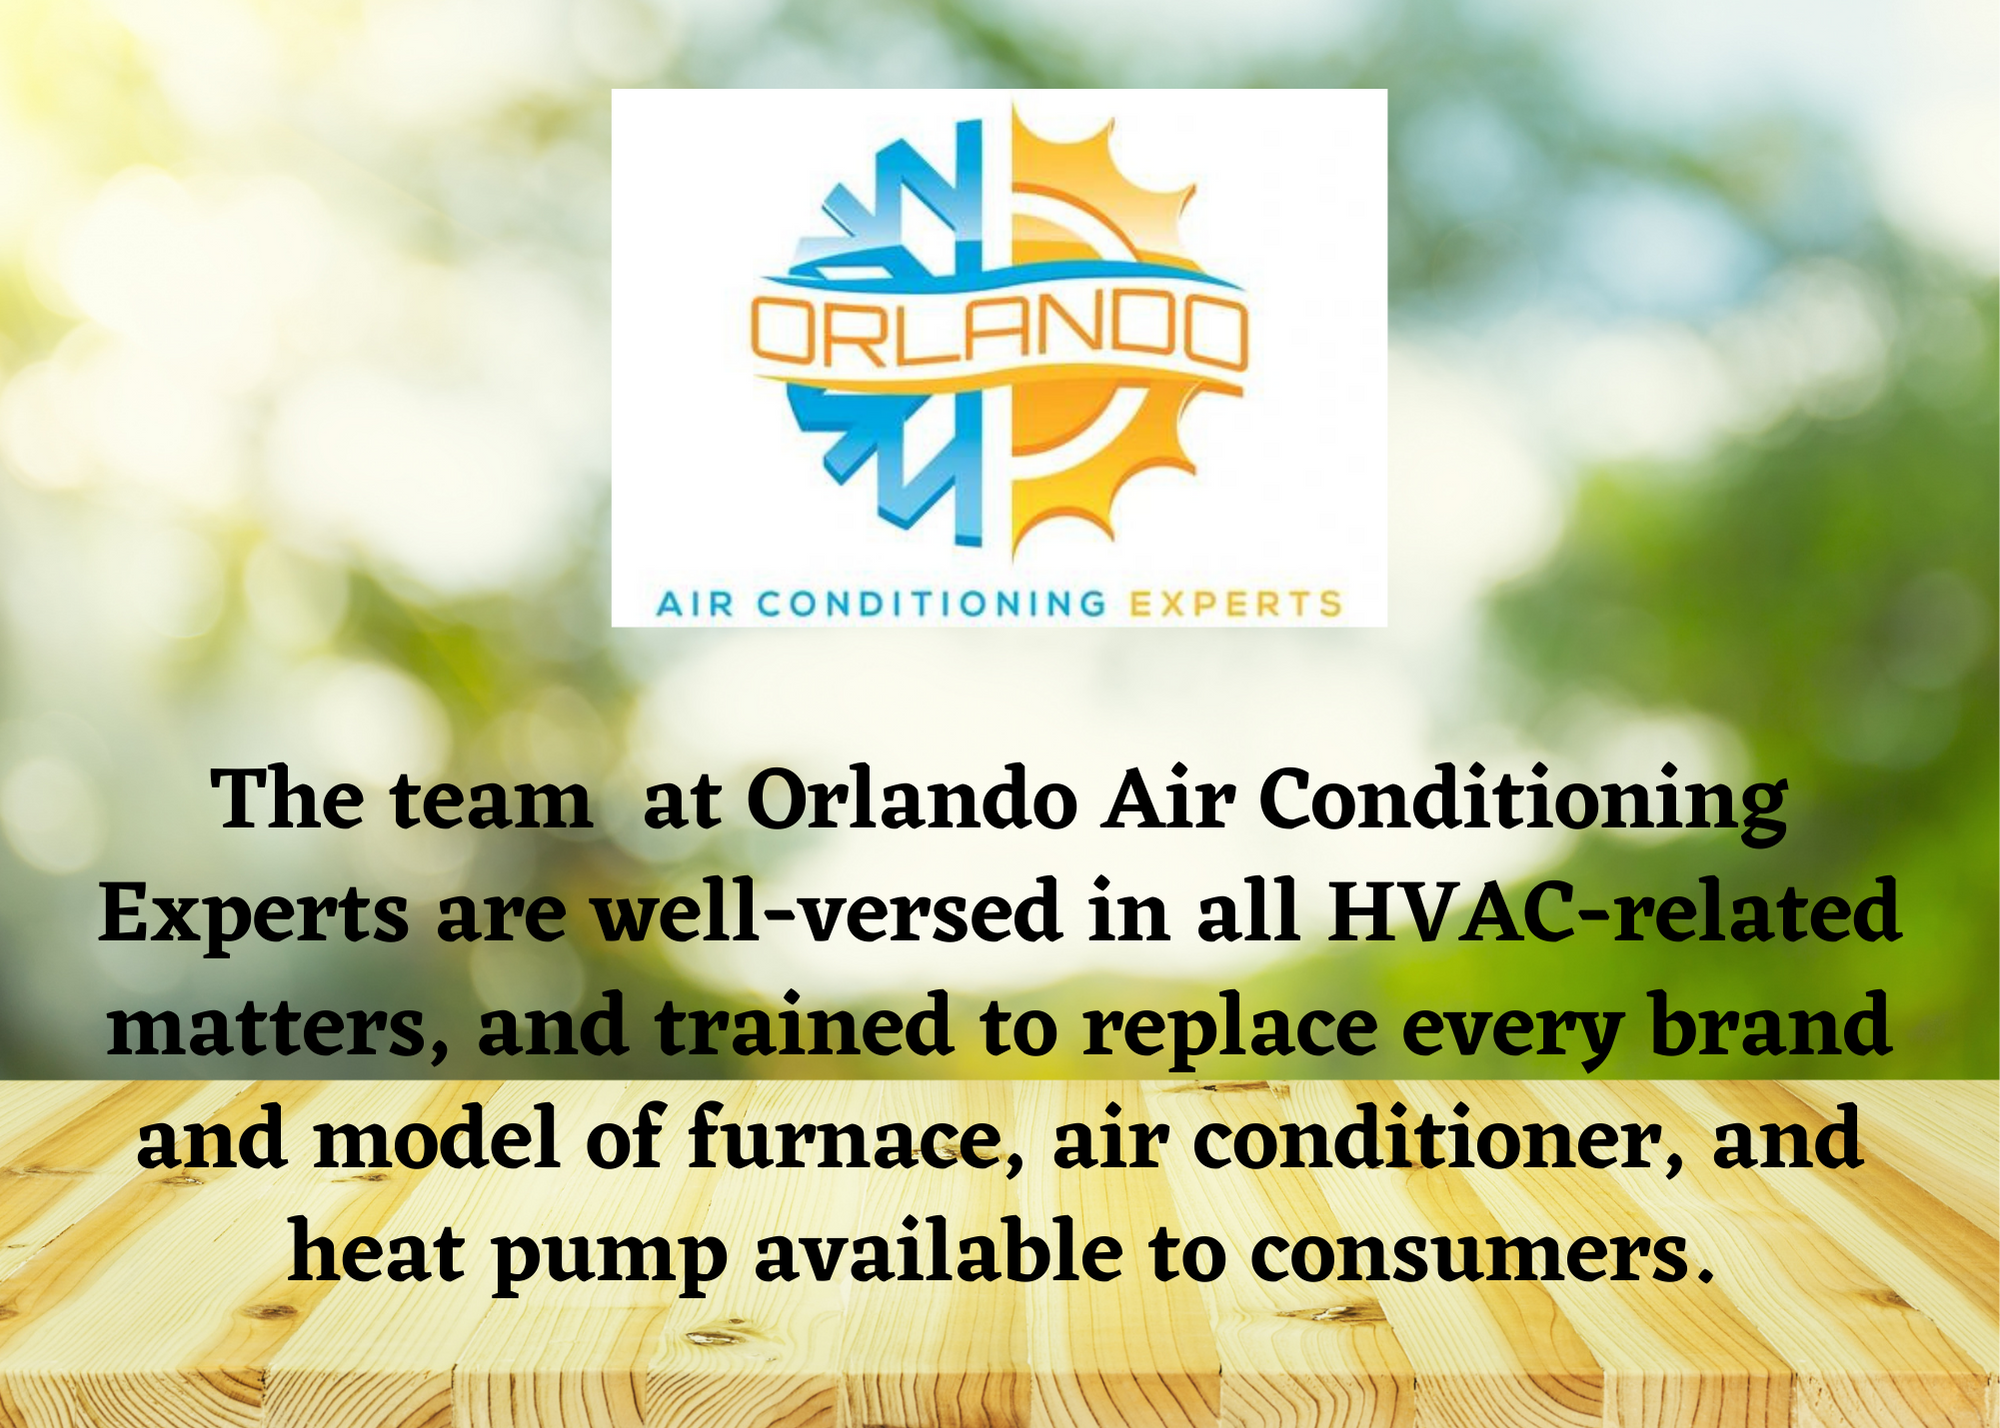 Orlando Air Conditioning Experts, Thursday, November 4, 2021, Press release picture